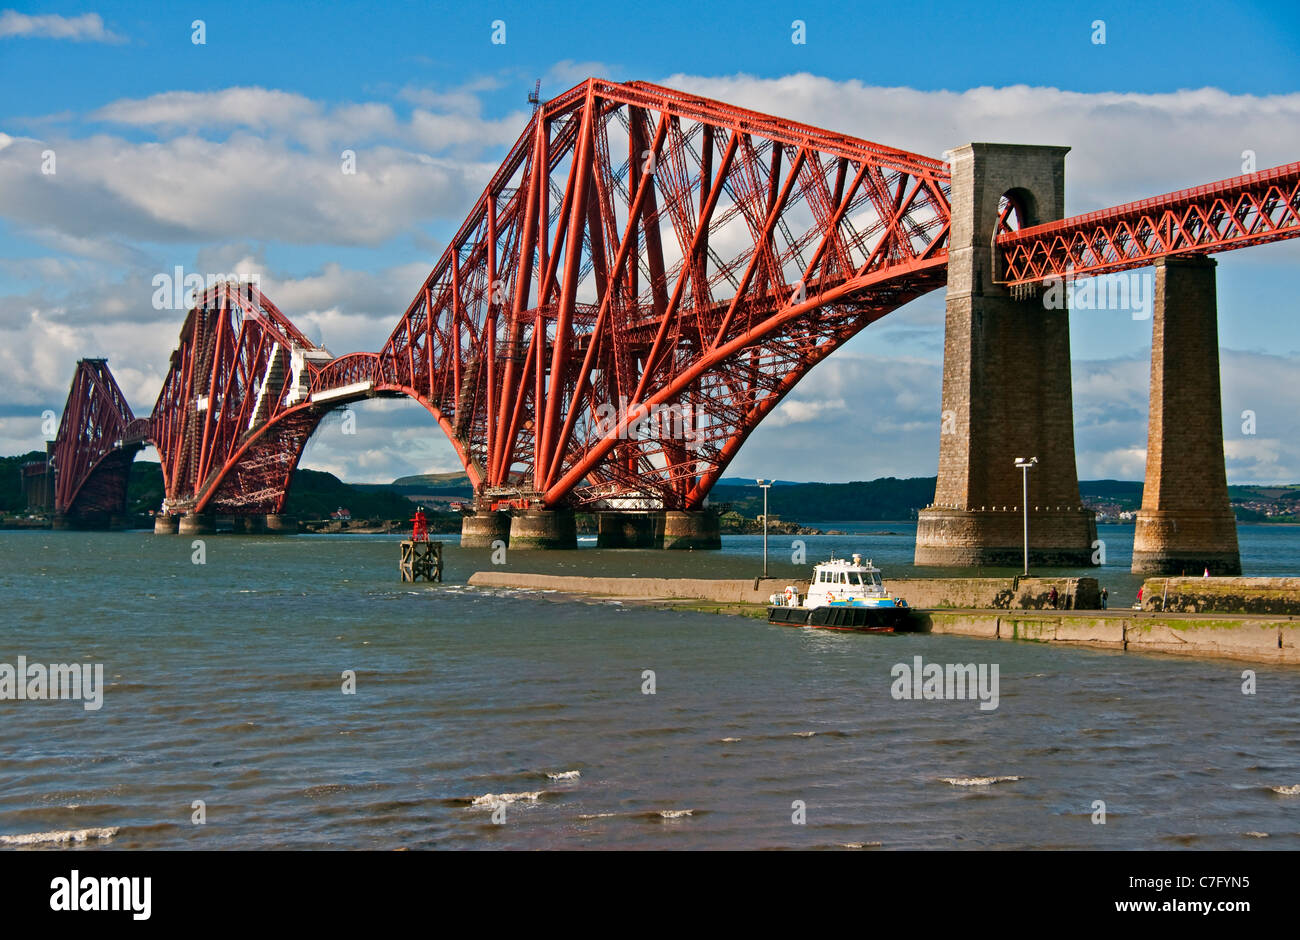 Scotland's iconic 19th century cantilevered Forth Railway Bridge over the Firth of Forth at South Queensferry Stock Photo